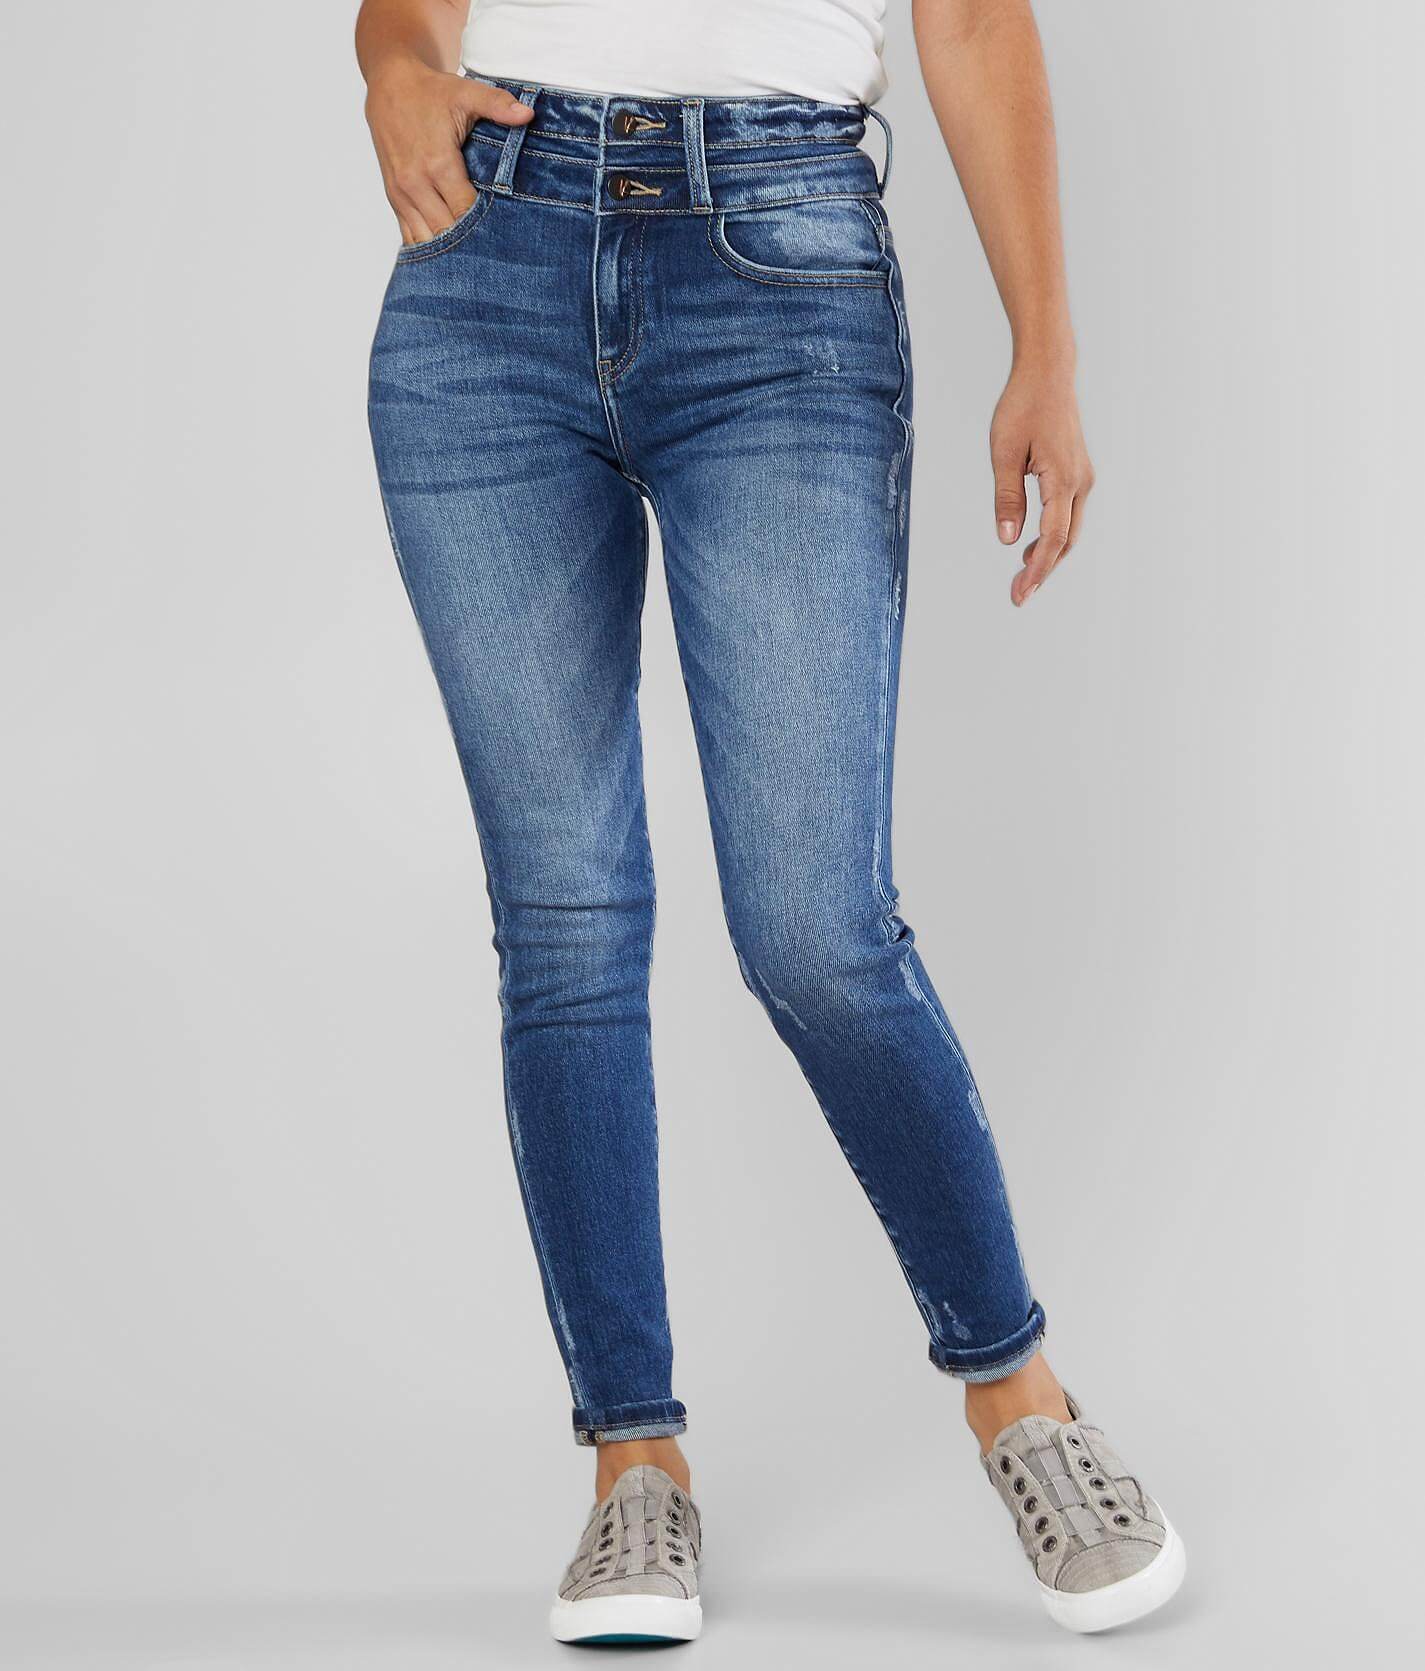 kancan jeans canada